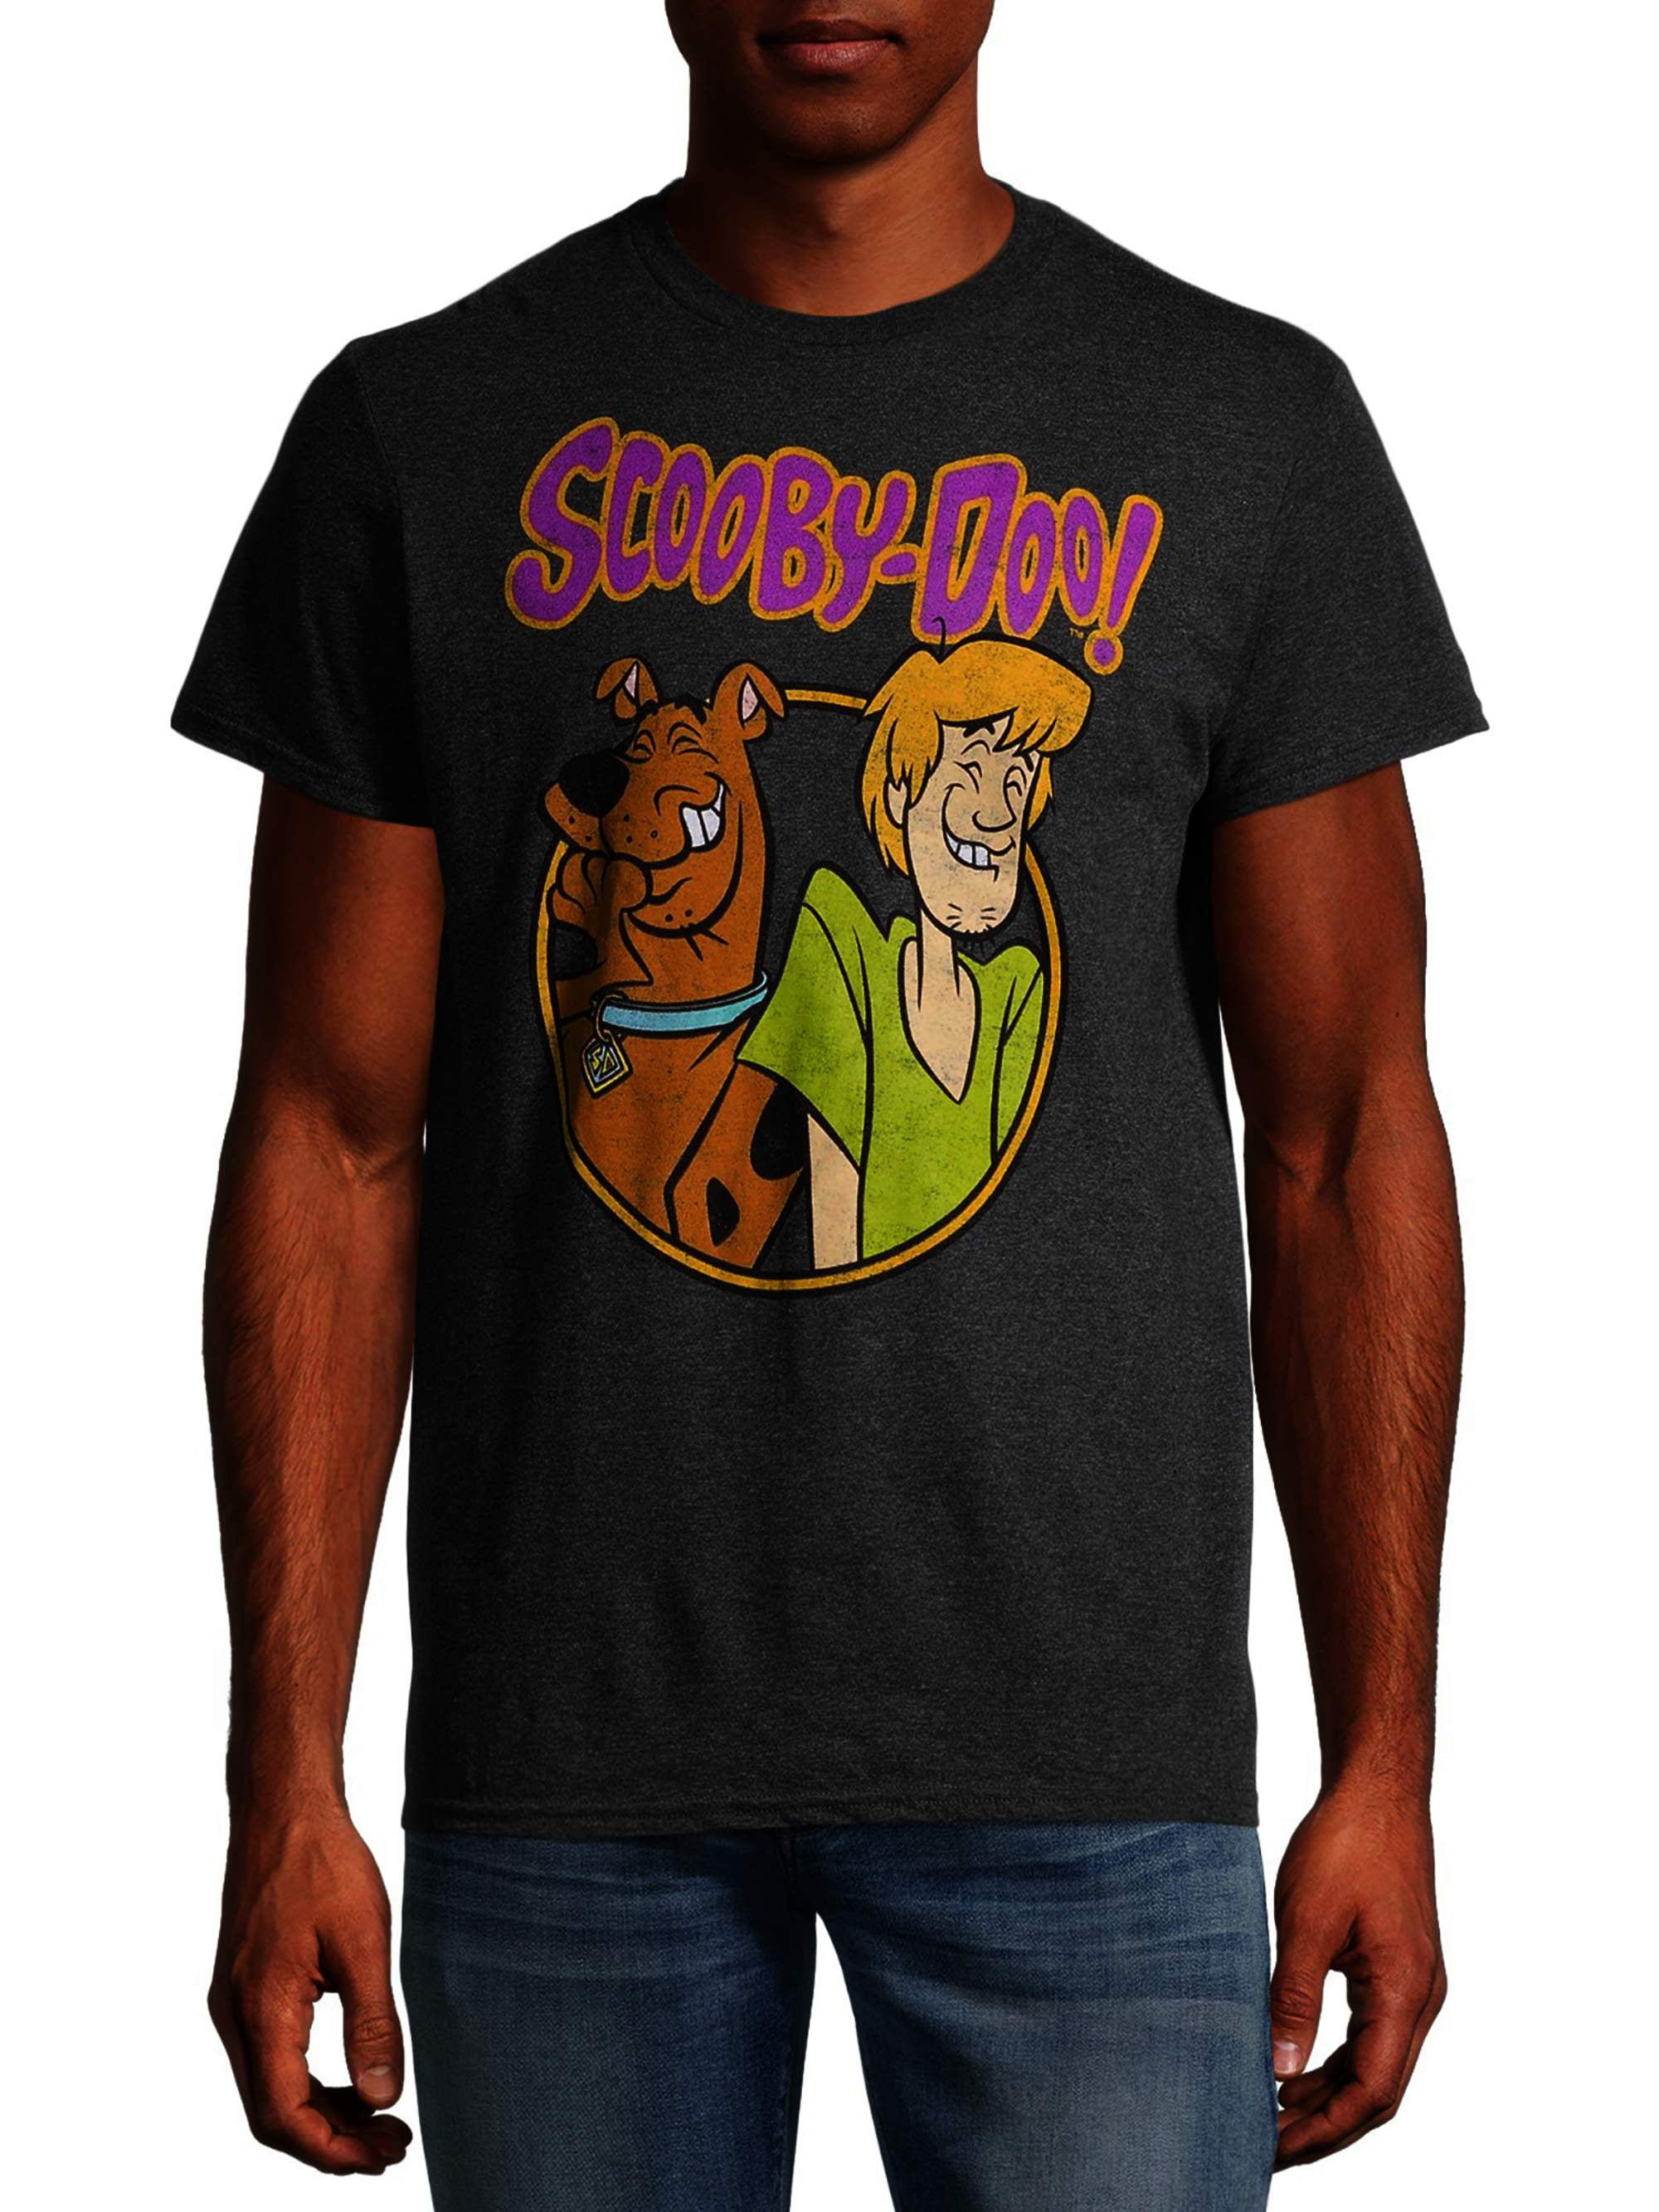 Scooby Doo Scooby And Shaggy Long Sleeve T-Shirt